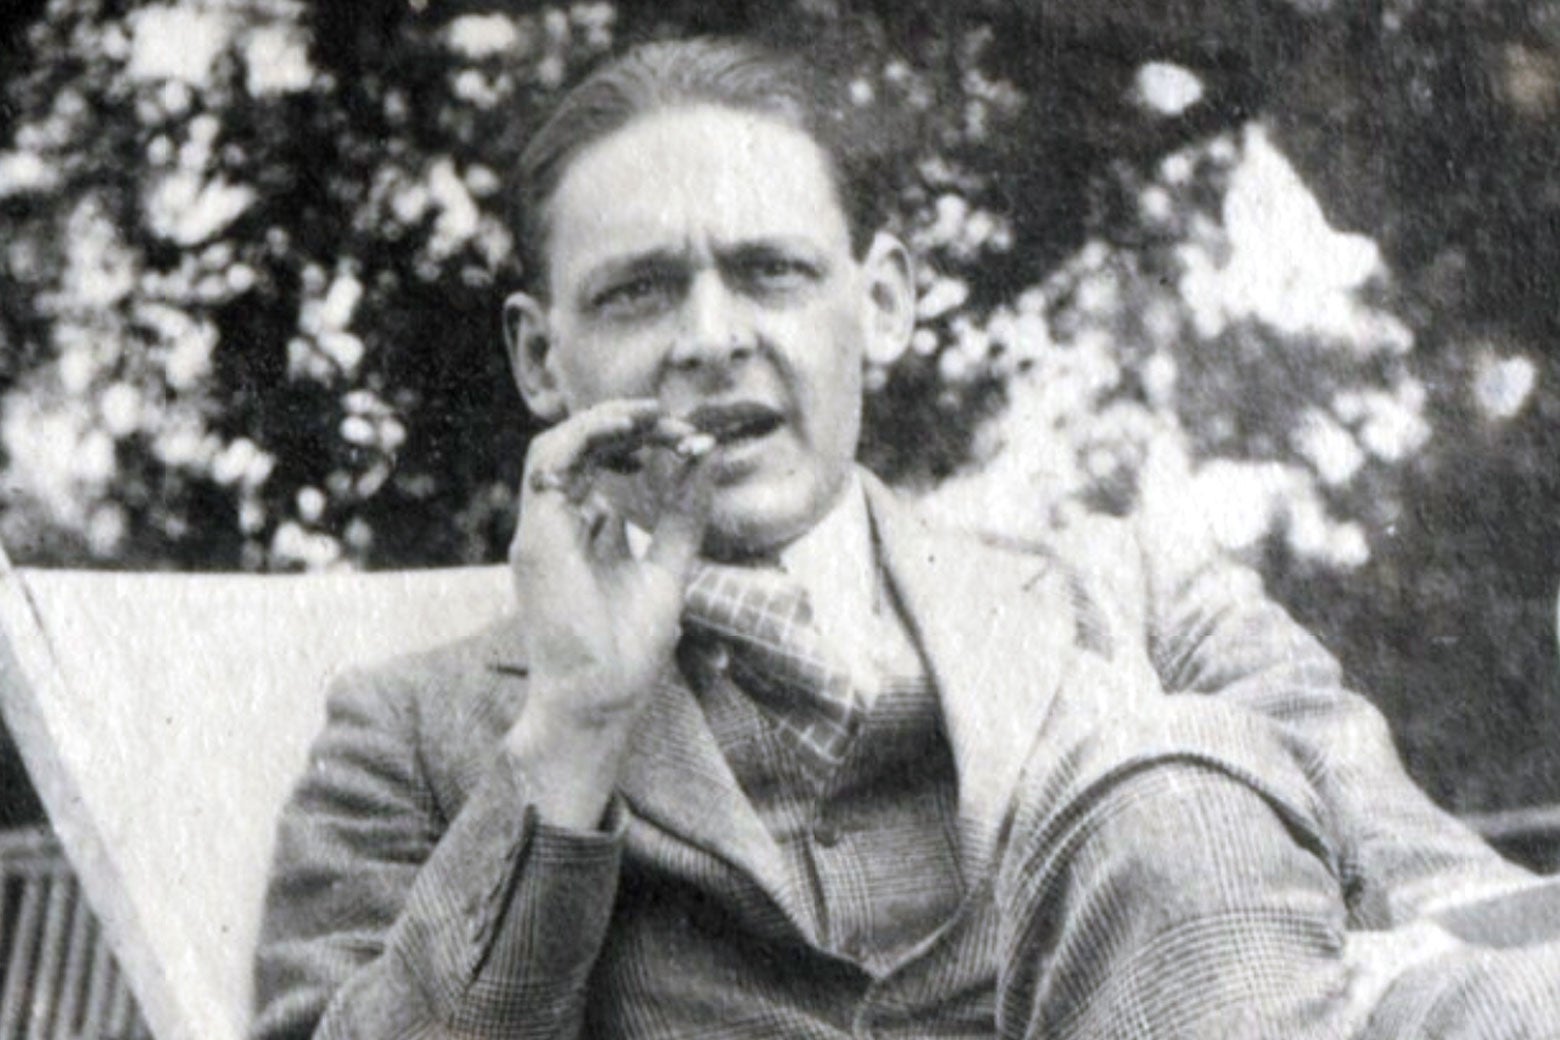 A black-and-white photo of T.S. Eliot smoking a cigar.